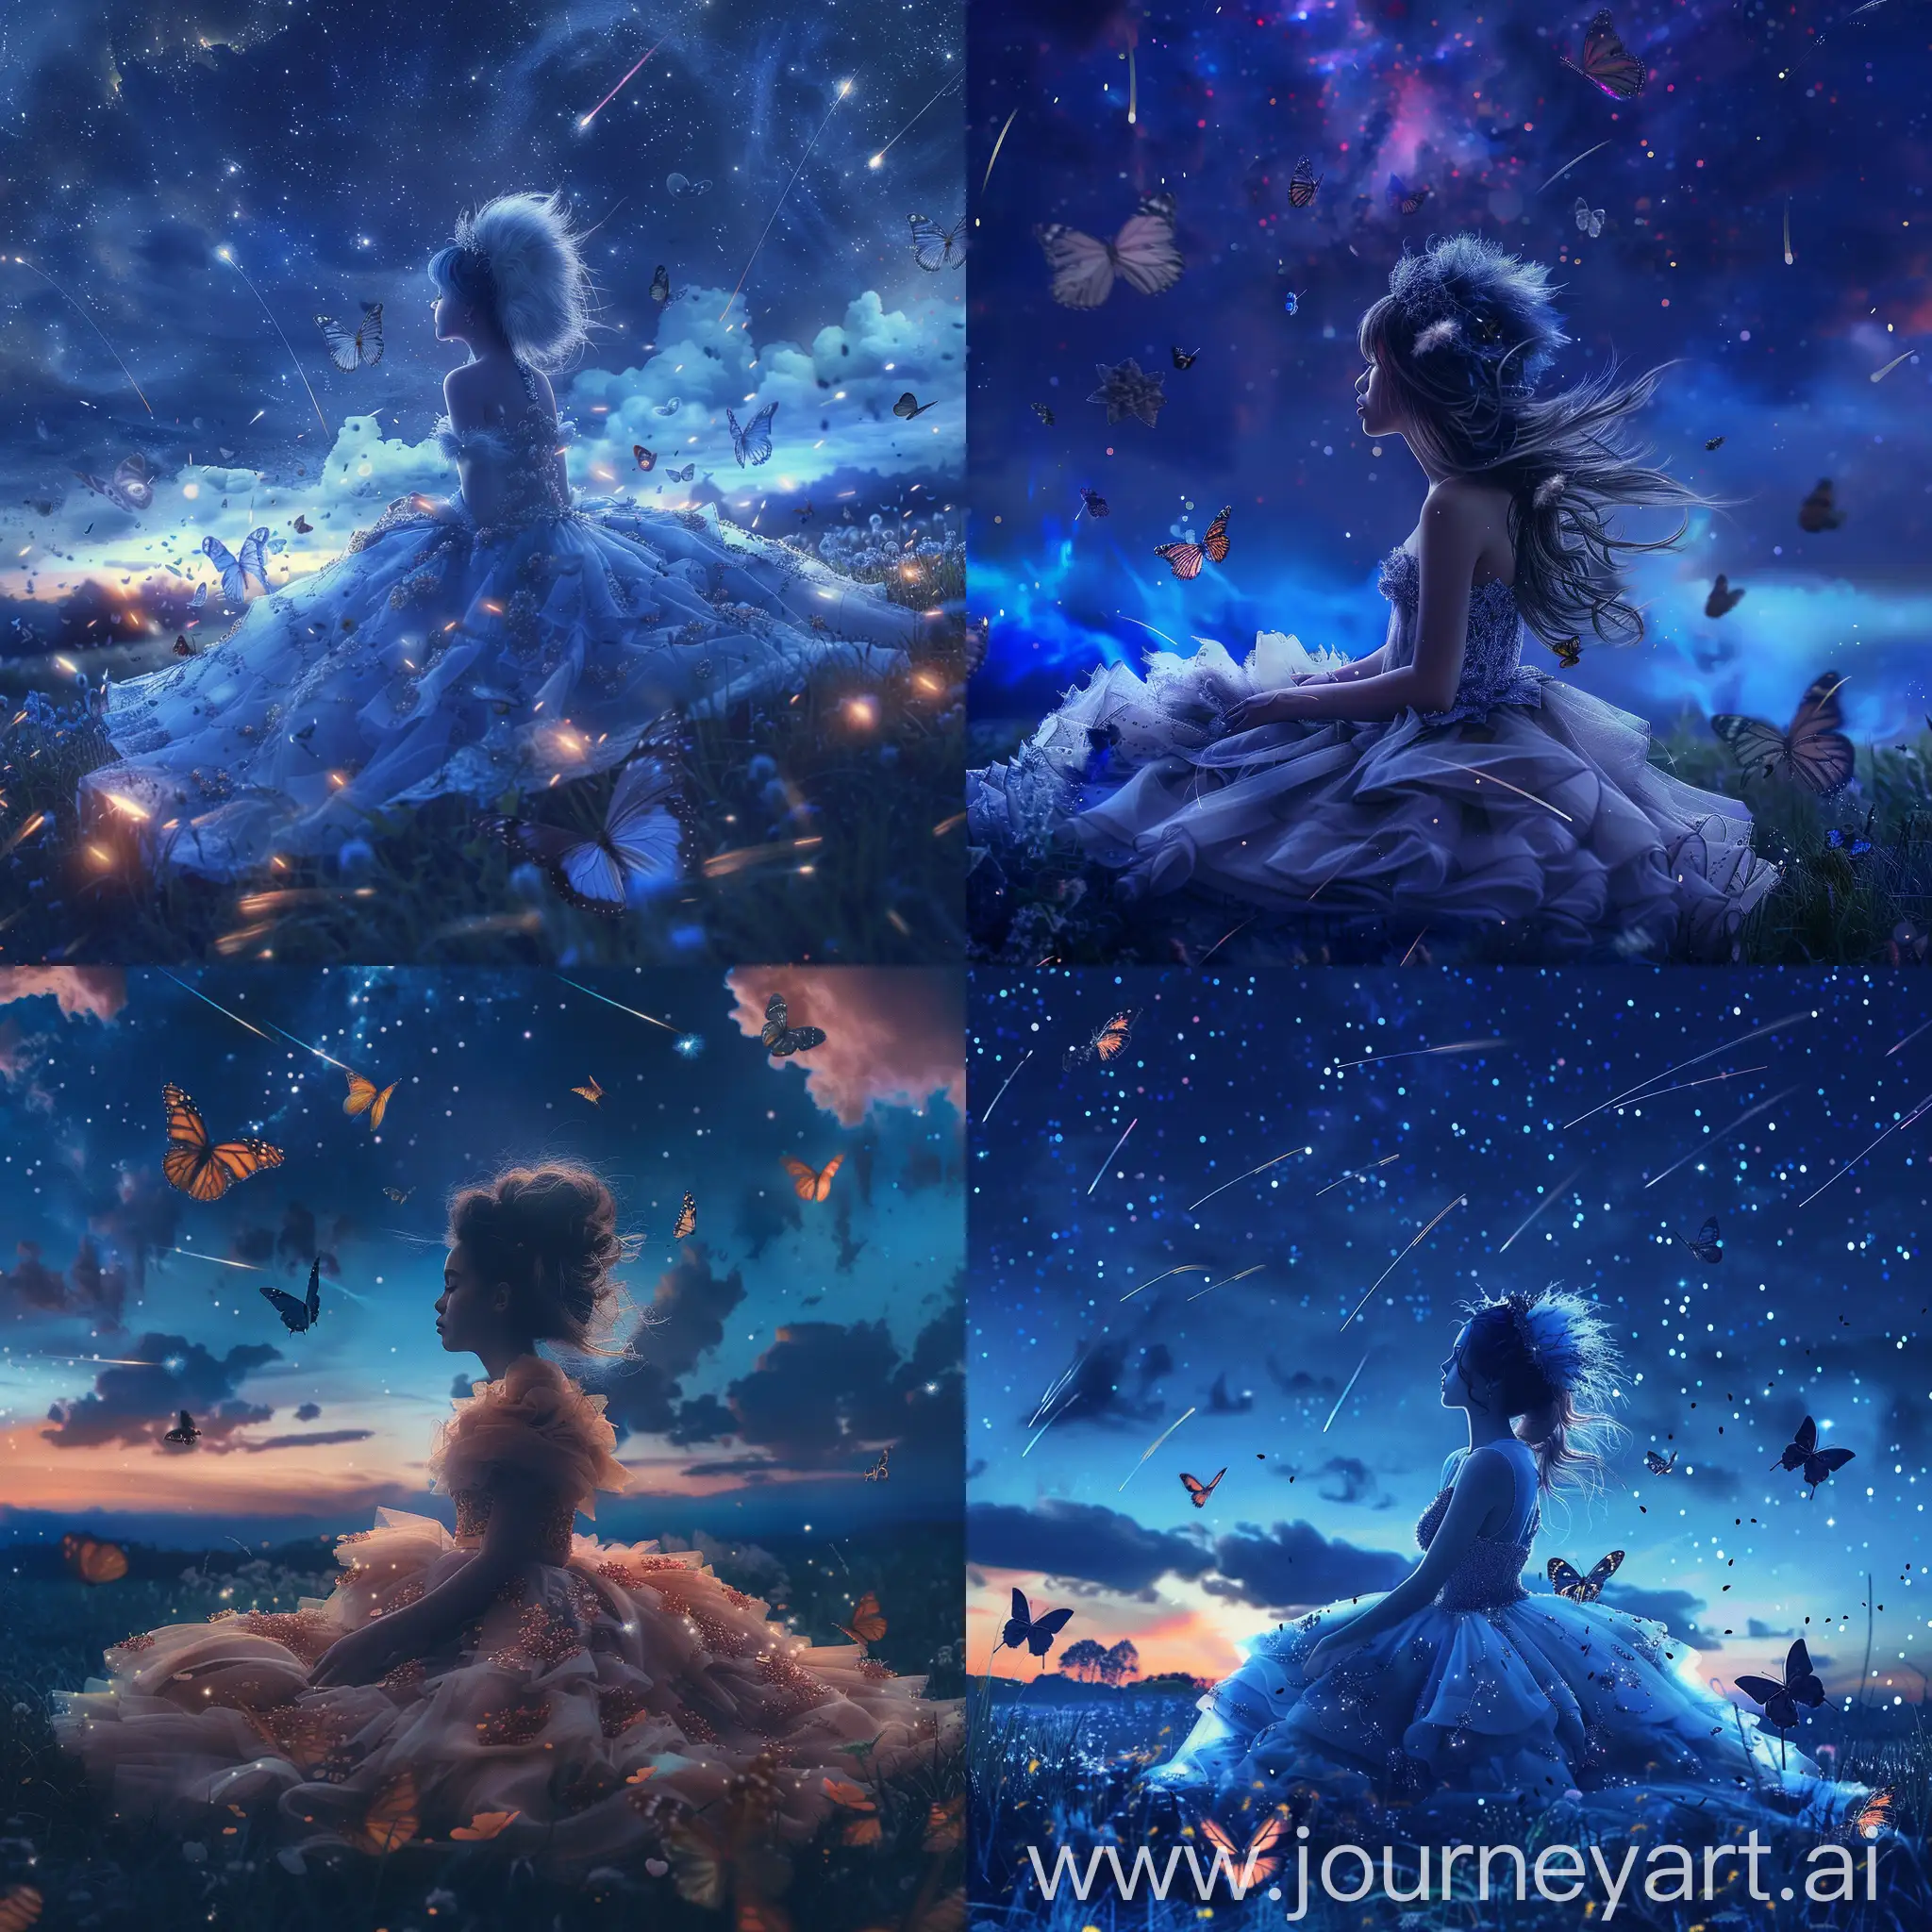 Starry-Meadow-Whimsical-Dress-Fluttering-Butterflies-and-Shooting-Stars